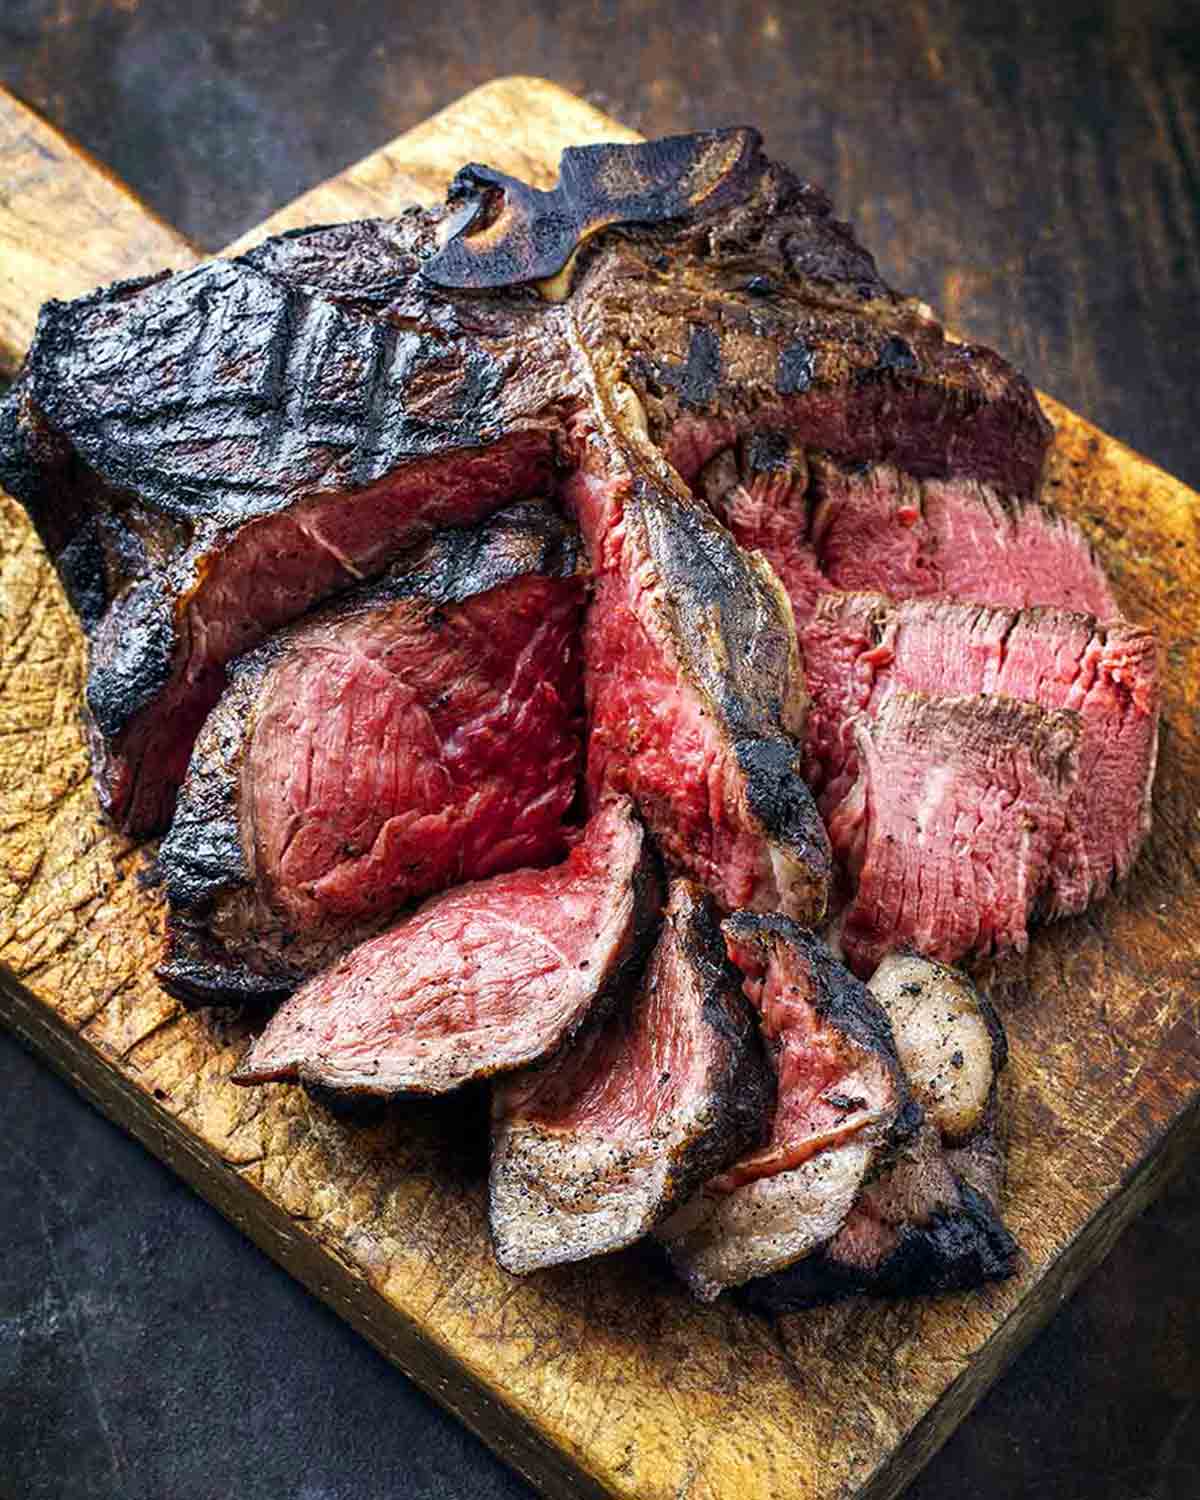 A partially sliced grilled porterhouse steak on a wooden cutting board.